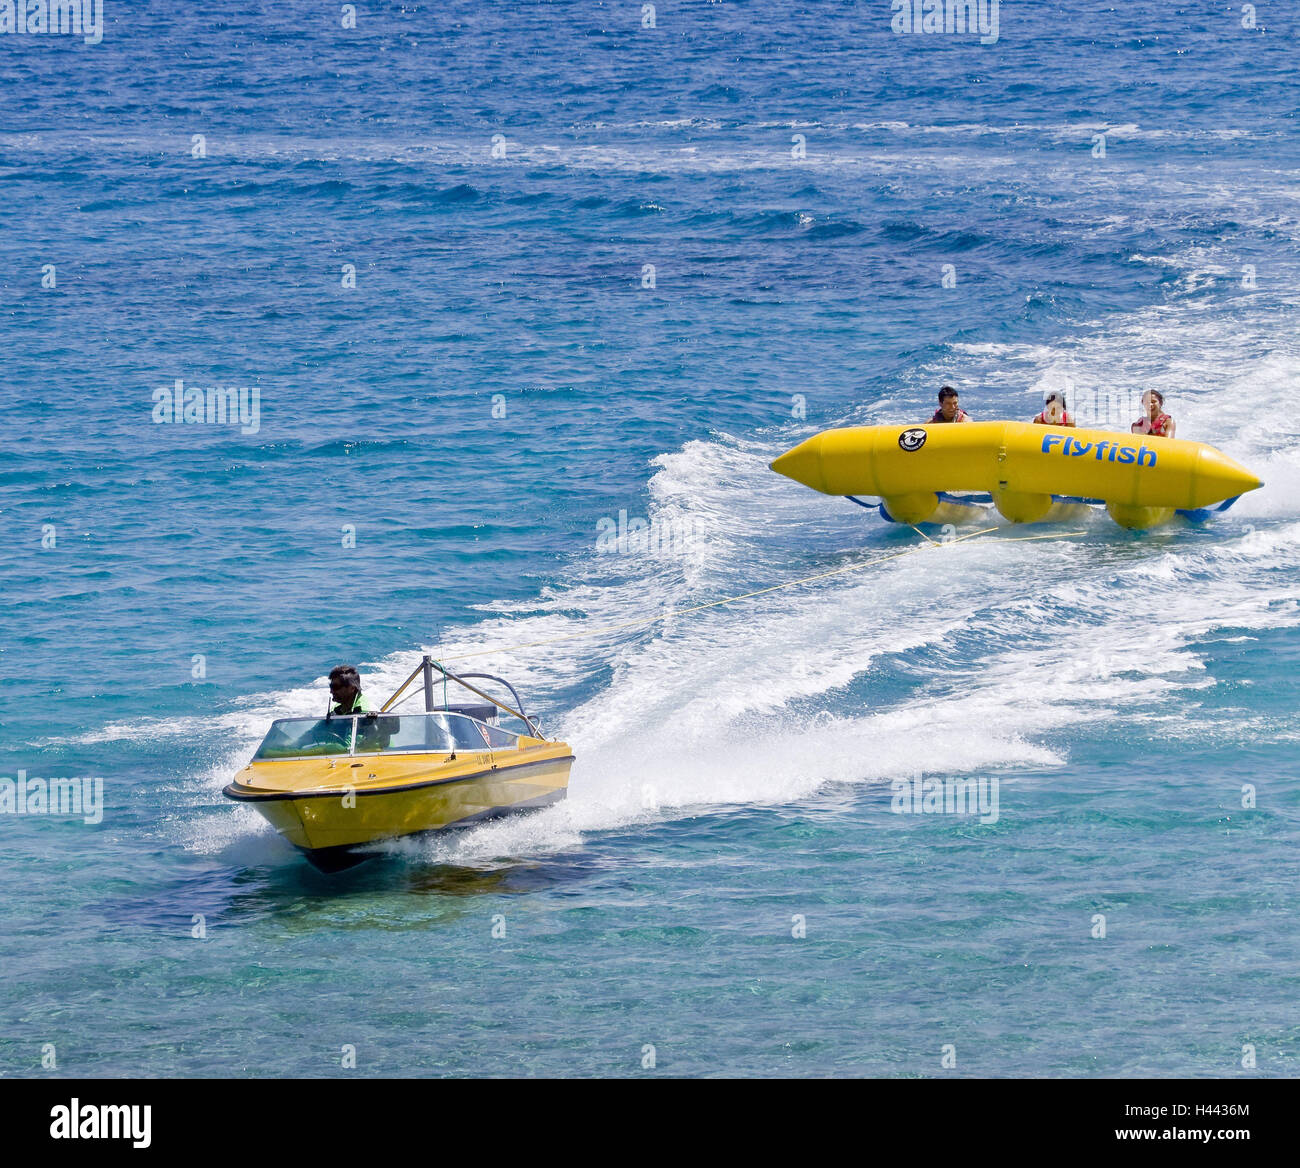 Sea, Motorboat, fly fishing, tourist, Action, water, sea, people, fun, attraction, tourism, tourist attraction, Cyprus, Protaras, Mediterranean, inflatable, water sports, Stock Photo